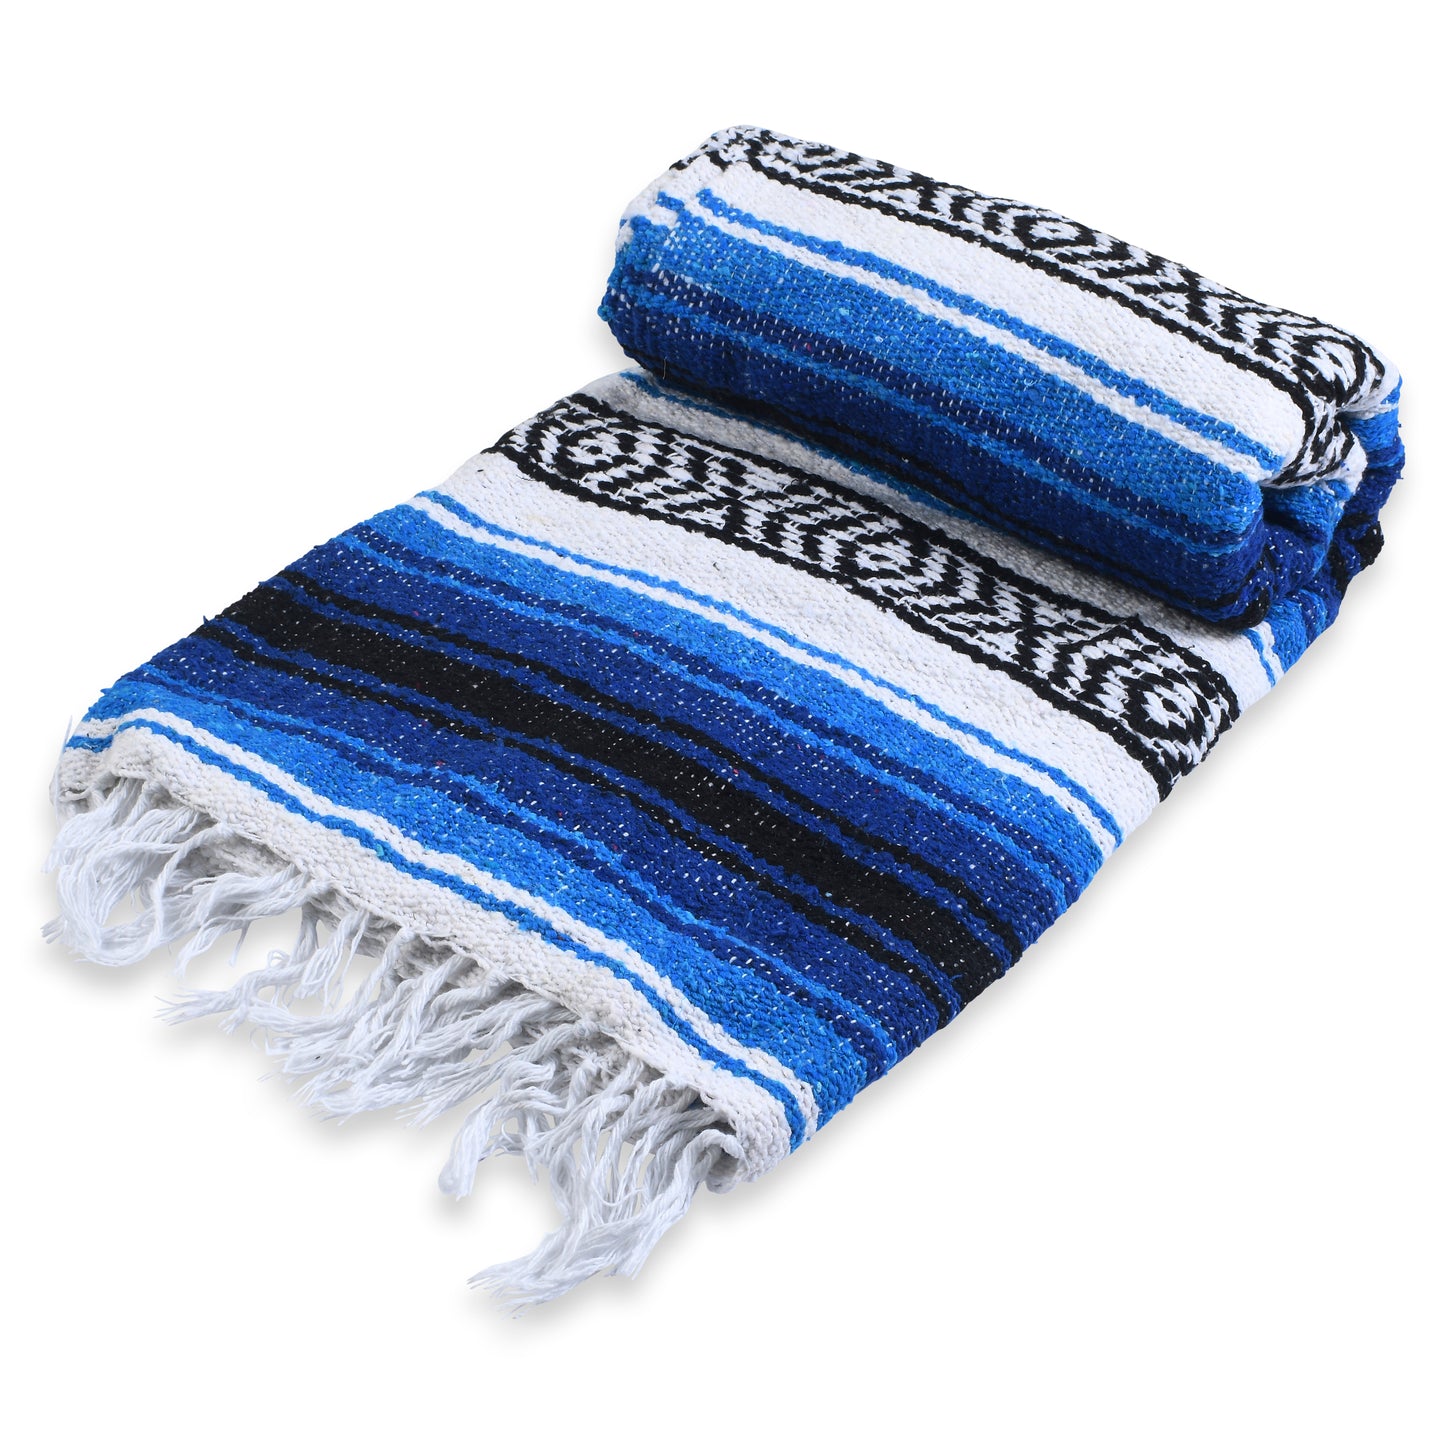 Mexican Blanket, Blue Waters - for Yoga, Camping, Picnics, Travel, Beach